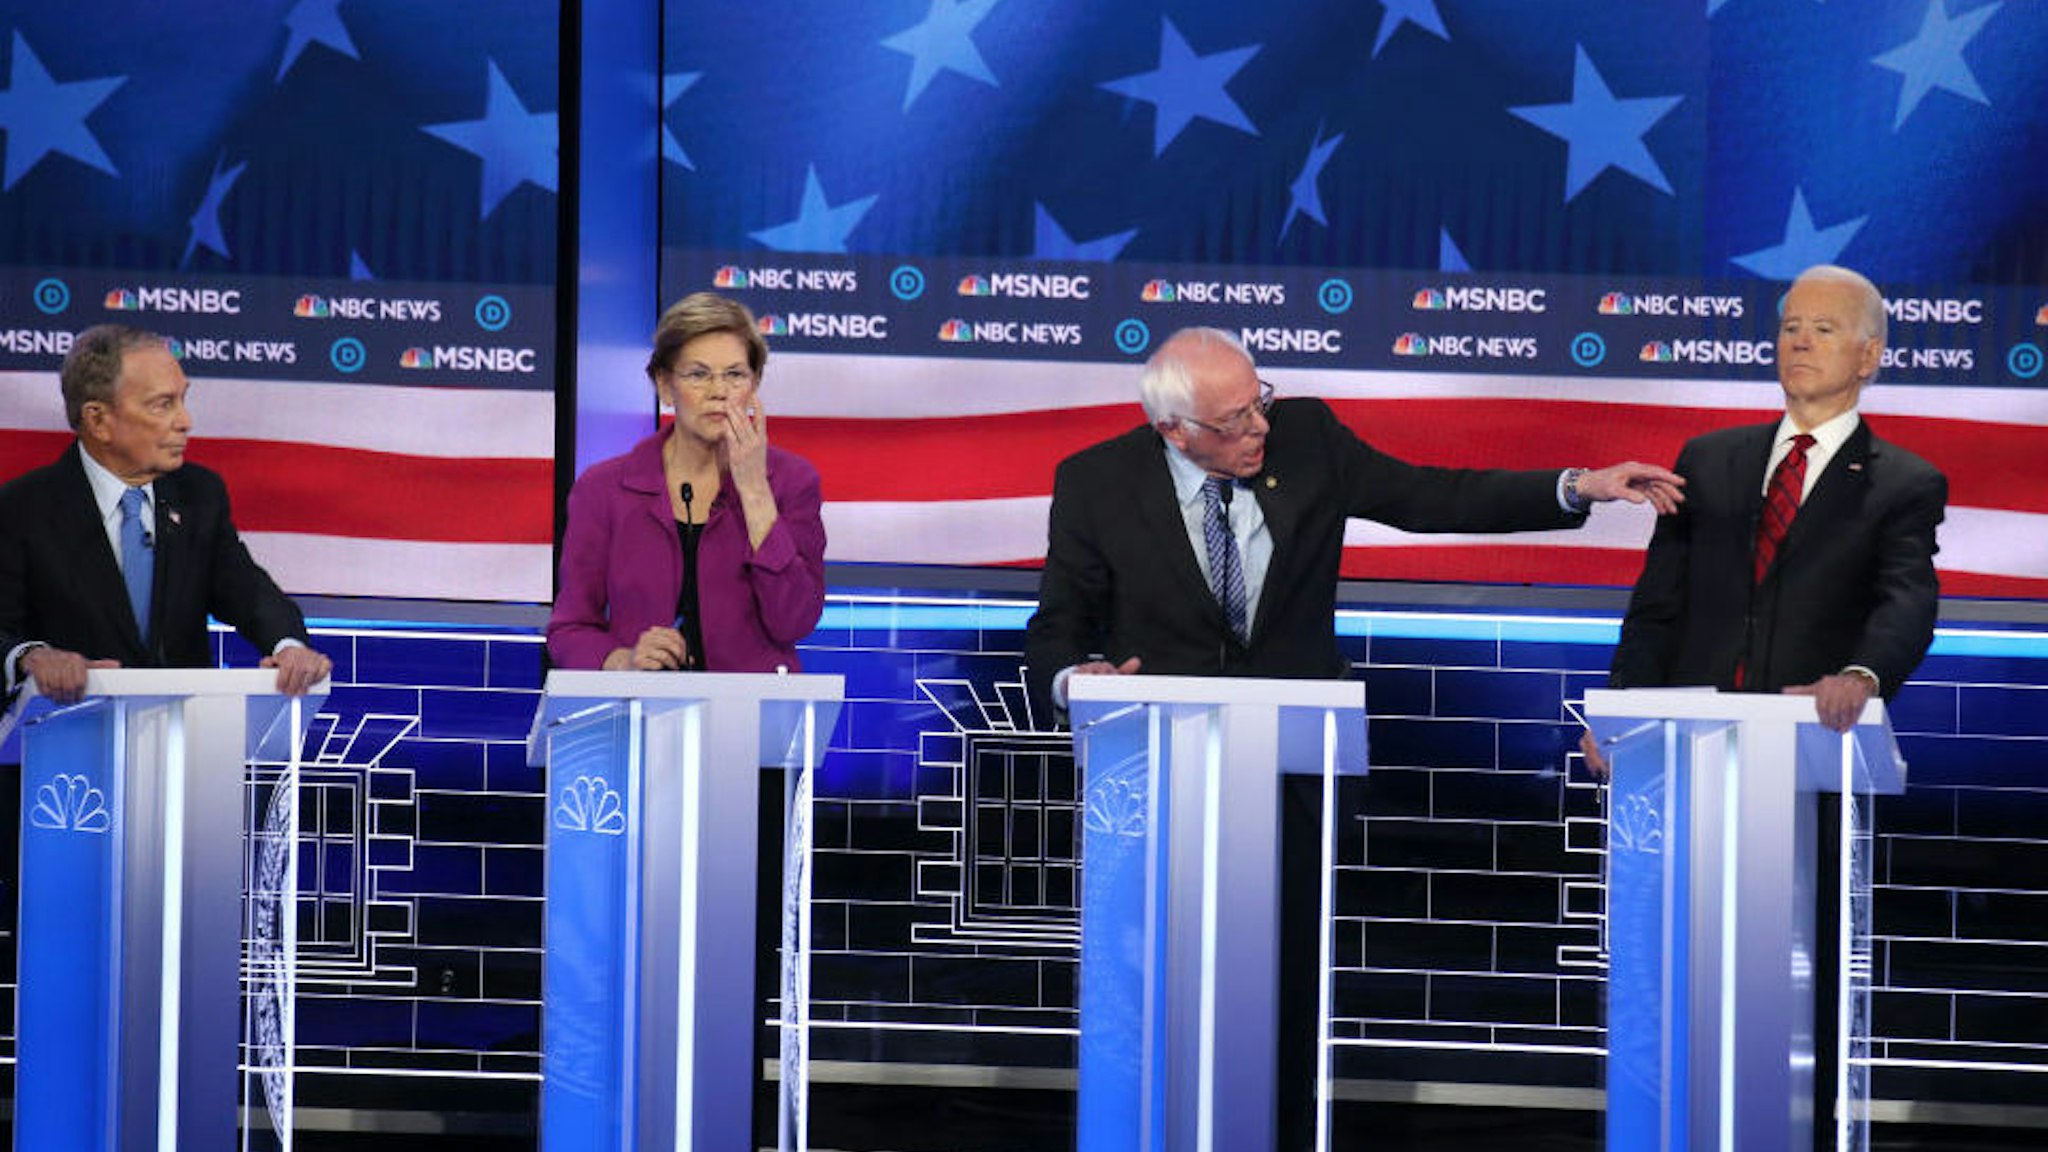 LAS VEGAS, NEVADA - FEBRUARY 19: Democratic presidential candidate Sen. Bernie Sanders (I-VT) (R) makes a point as Sen. Elizabeth Warren (D-MA), former New York City mayor Mike Bloomberg(L) and former Vice President Joe Biden (R) listen during the Democratic presidential primary debate at Paris Las Vegas on February 19, 2020 in Las Vegas, Nevada. Six candidates qualified for the third Democratic presidential primary debate of 2020, which comes just days before the Nevada caucuses on February 22.